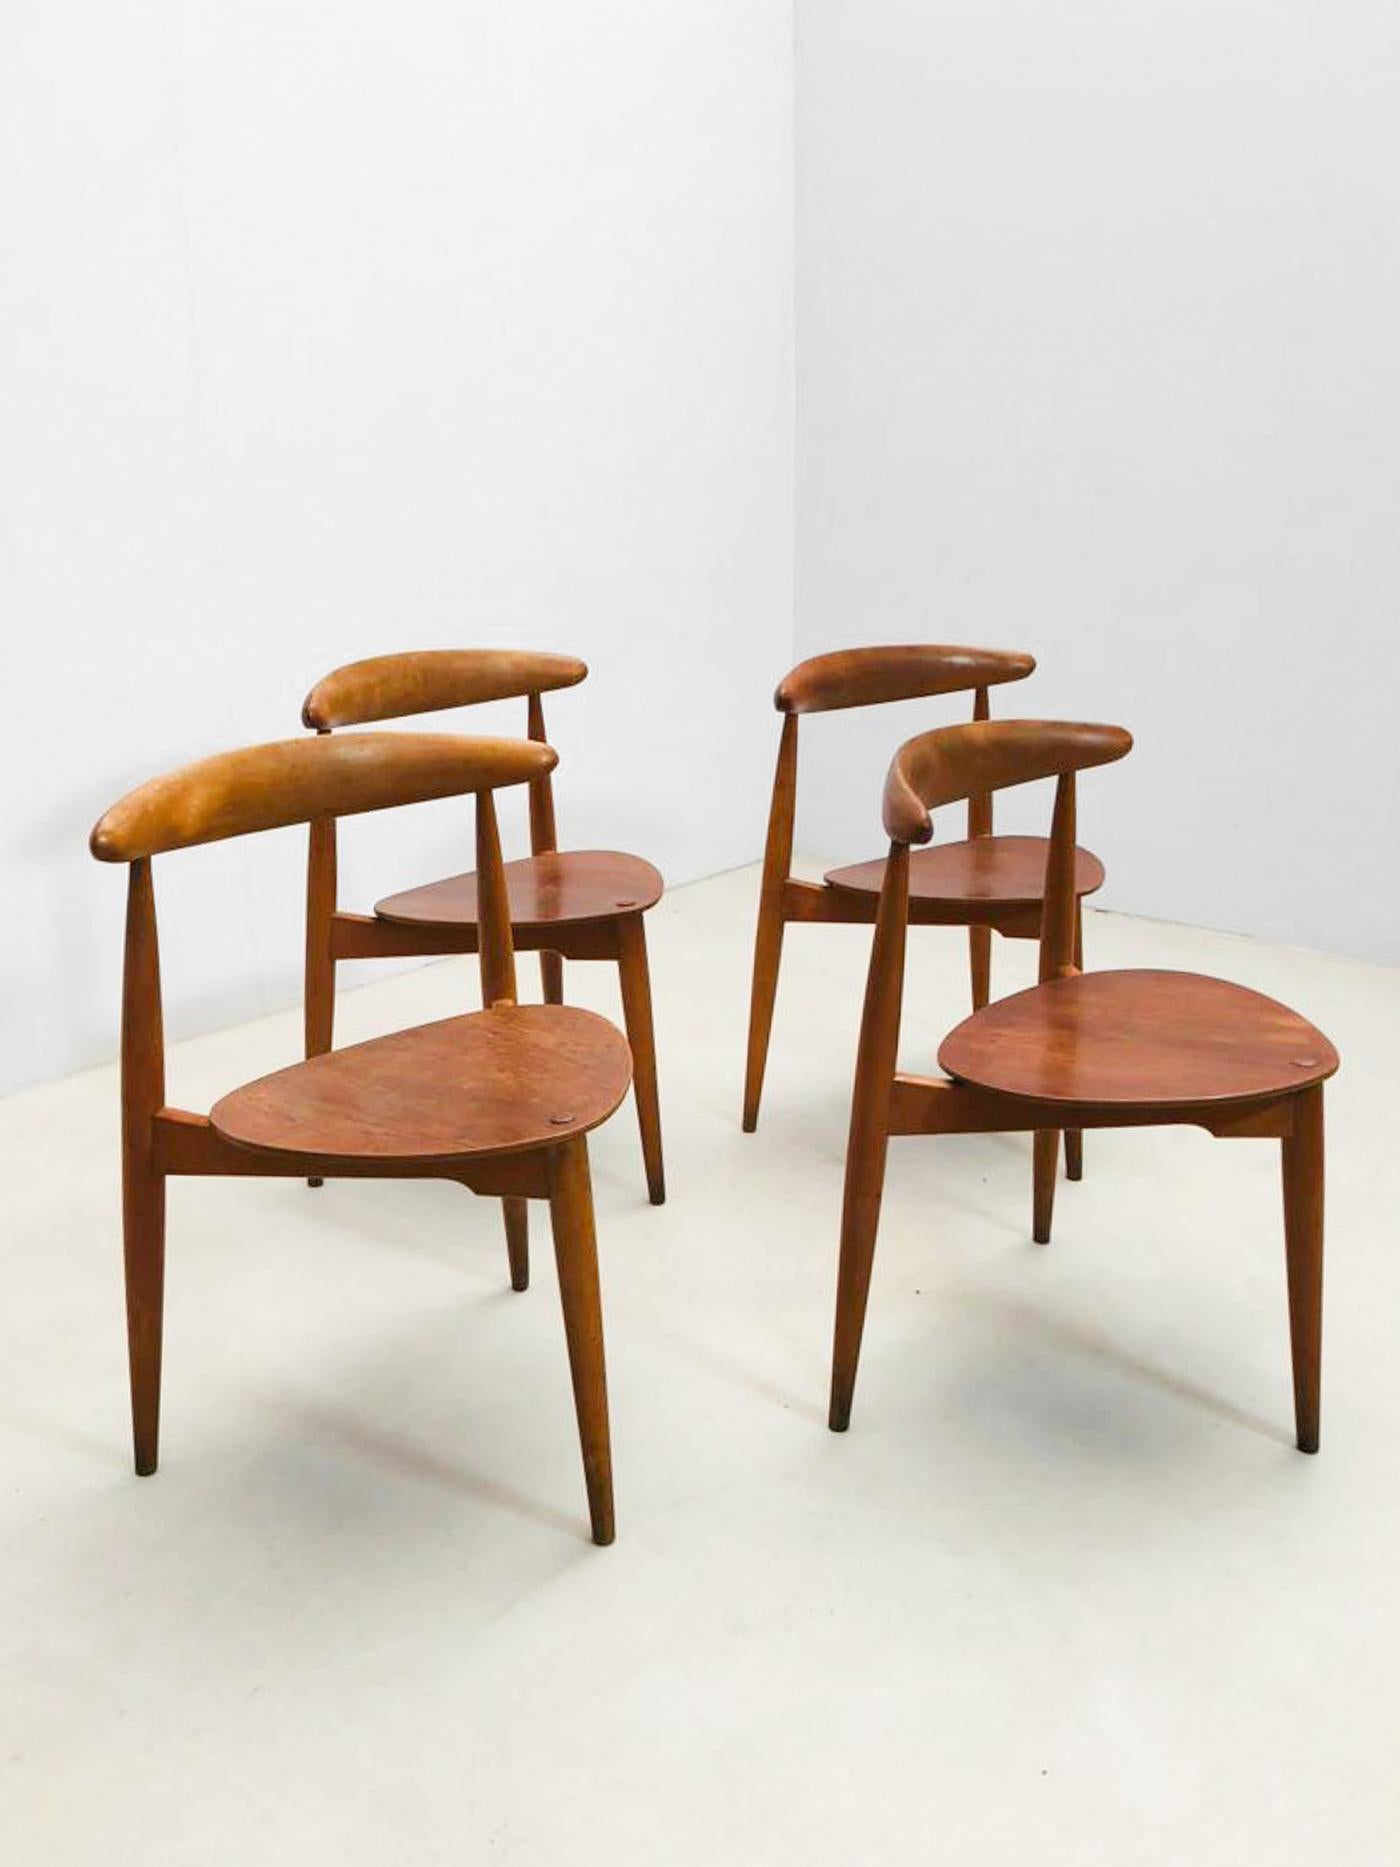 Set of 4 'FH4103' tripod chairs, by the renowned Hans J. Wegner for Fritz Hansen in 1950s.
These iconic chairs are affectionately known as the 'heart chair' due to their distinctive silhouette.
Crafted with a solid beech frame and teak veneered